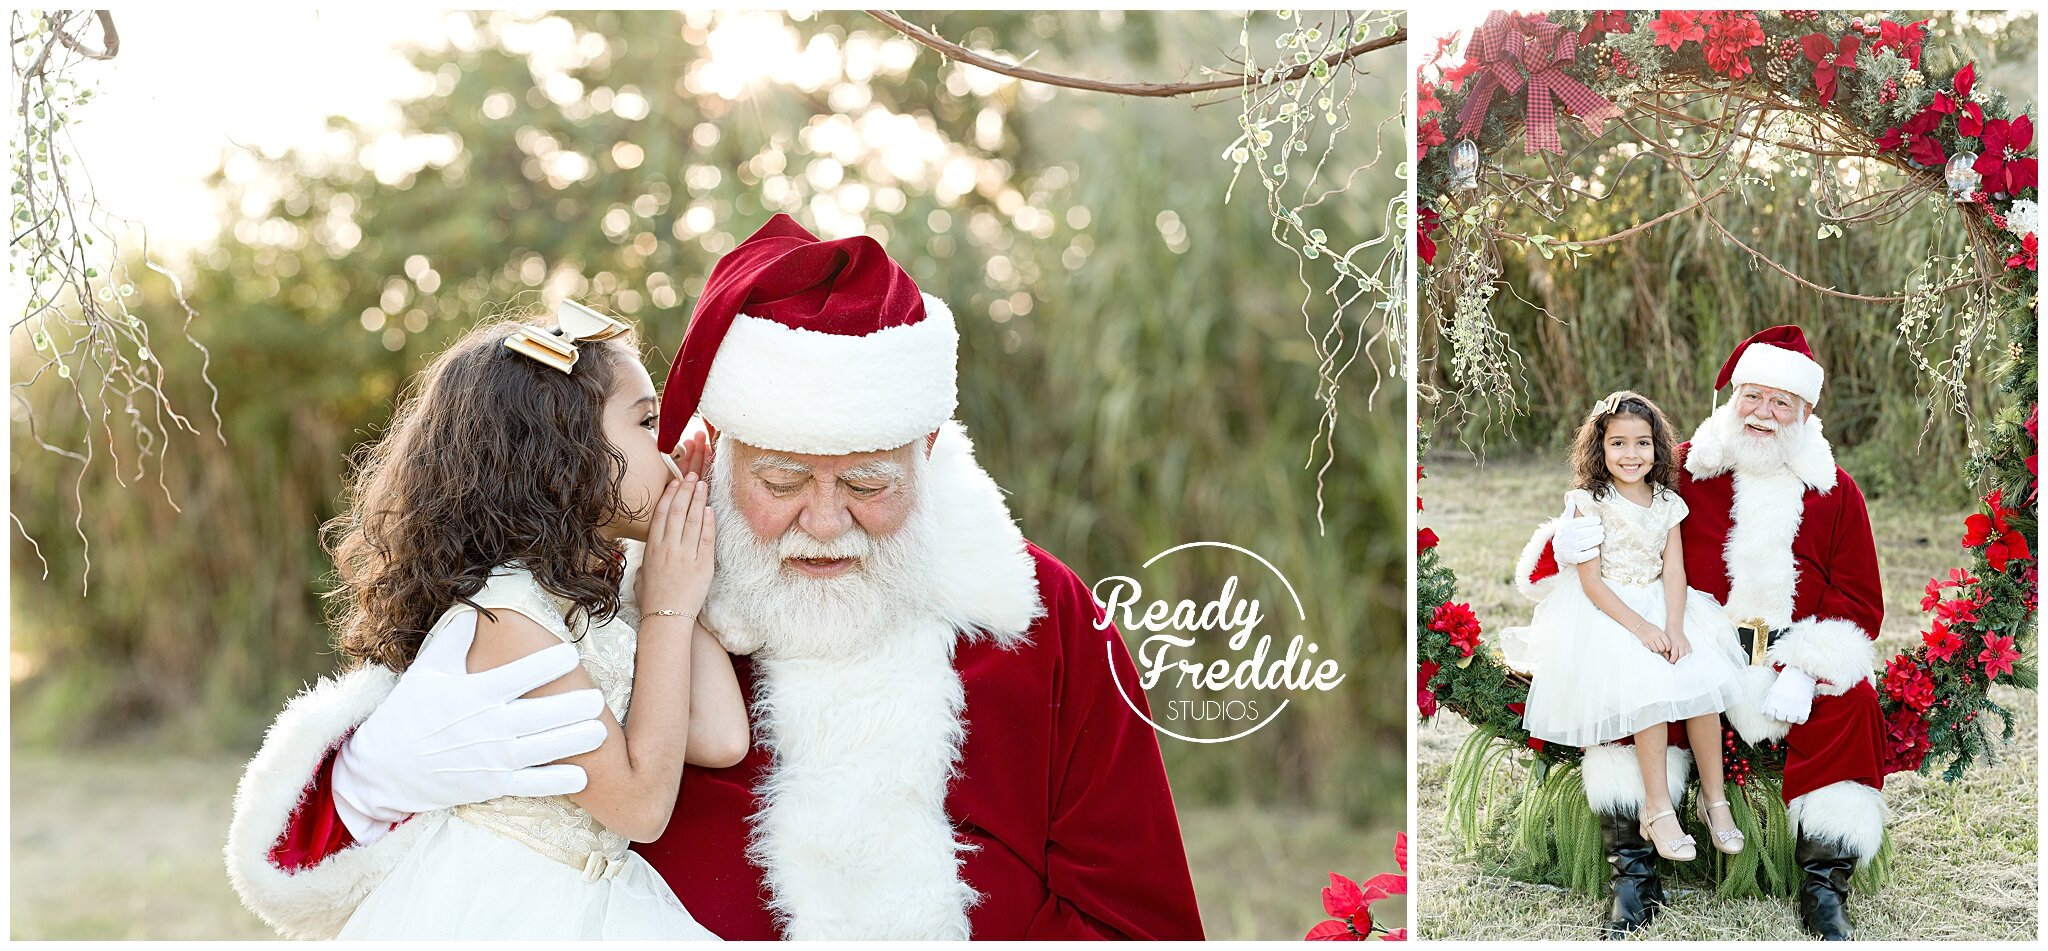 Kids whispering to Santa during outdoor holiday minis with Ivanna Vidal Photography